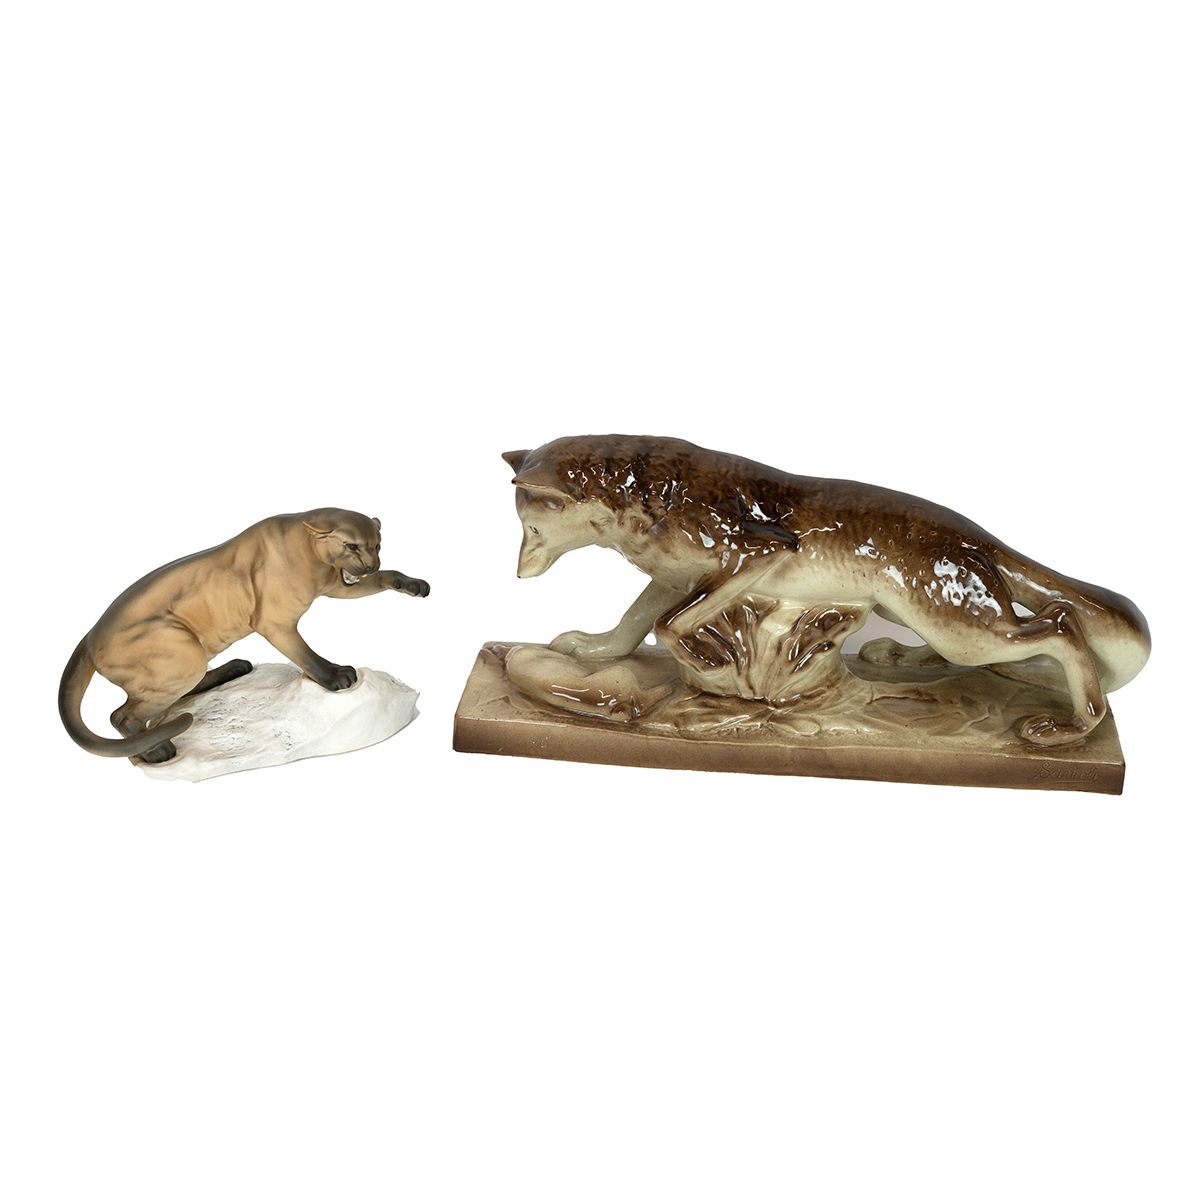 Beswick large bisque glaze figurine of a Cougar in aggressive pose on a white rock (model 1702) h...